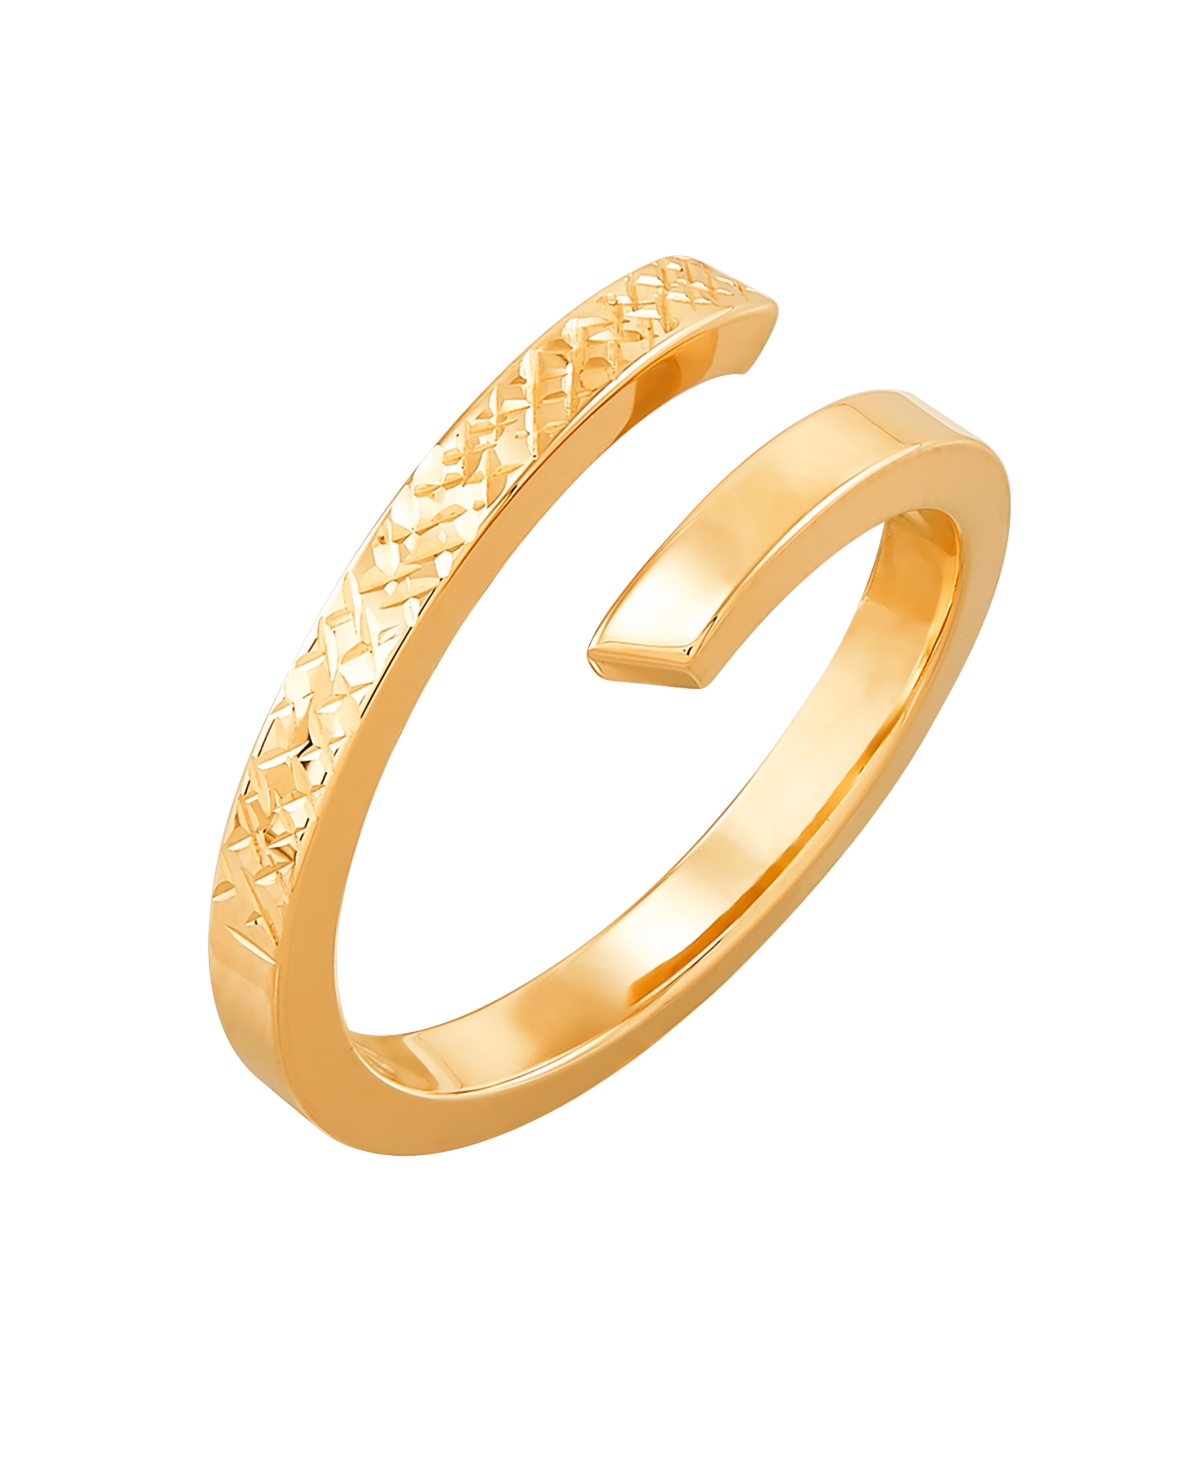 ITALIAN GOLD POLISHED DIAMOND CUT BYPASS RING IN 10K YELLOW GOLD